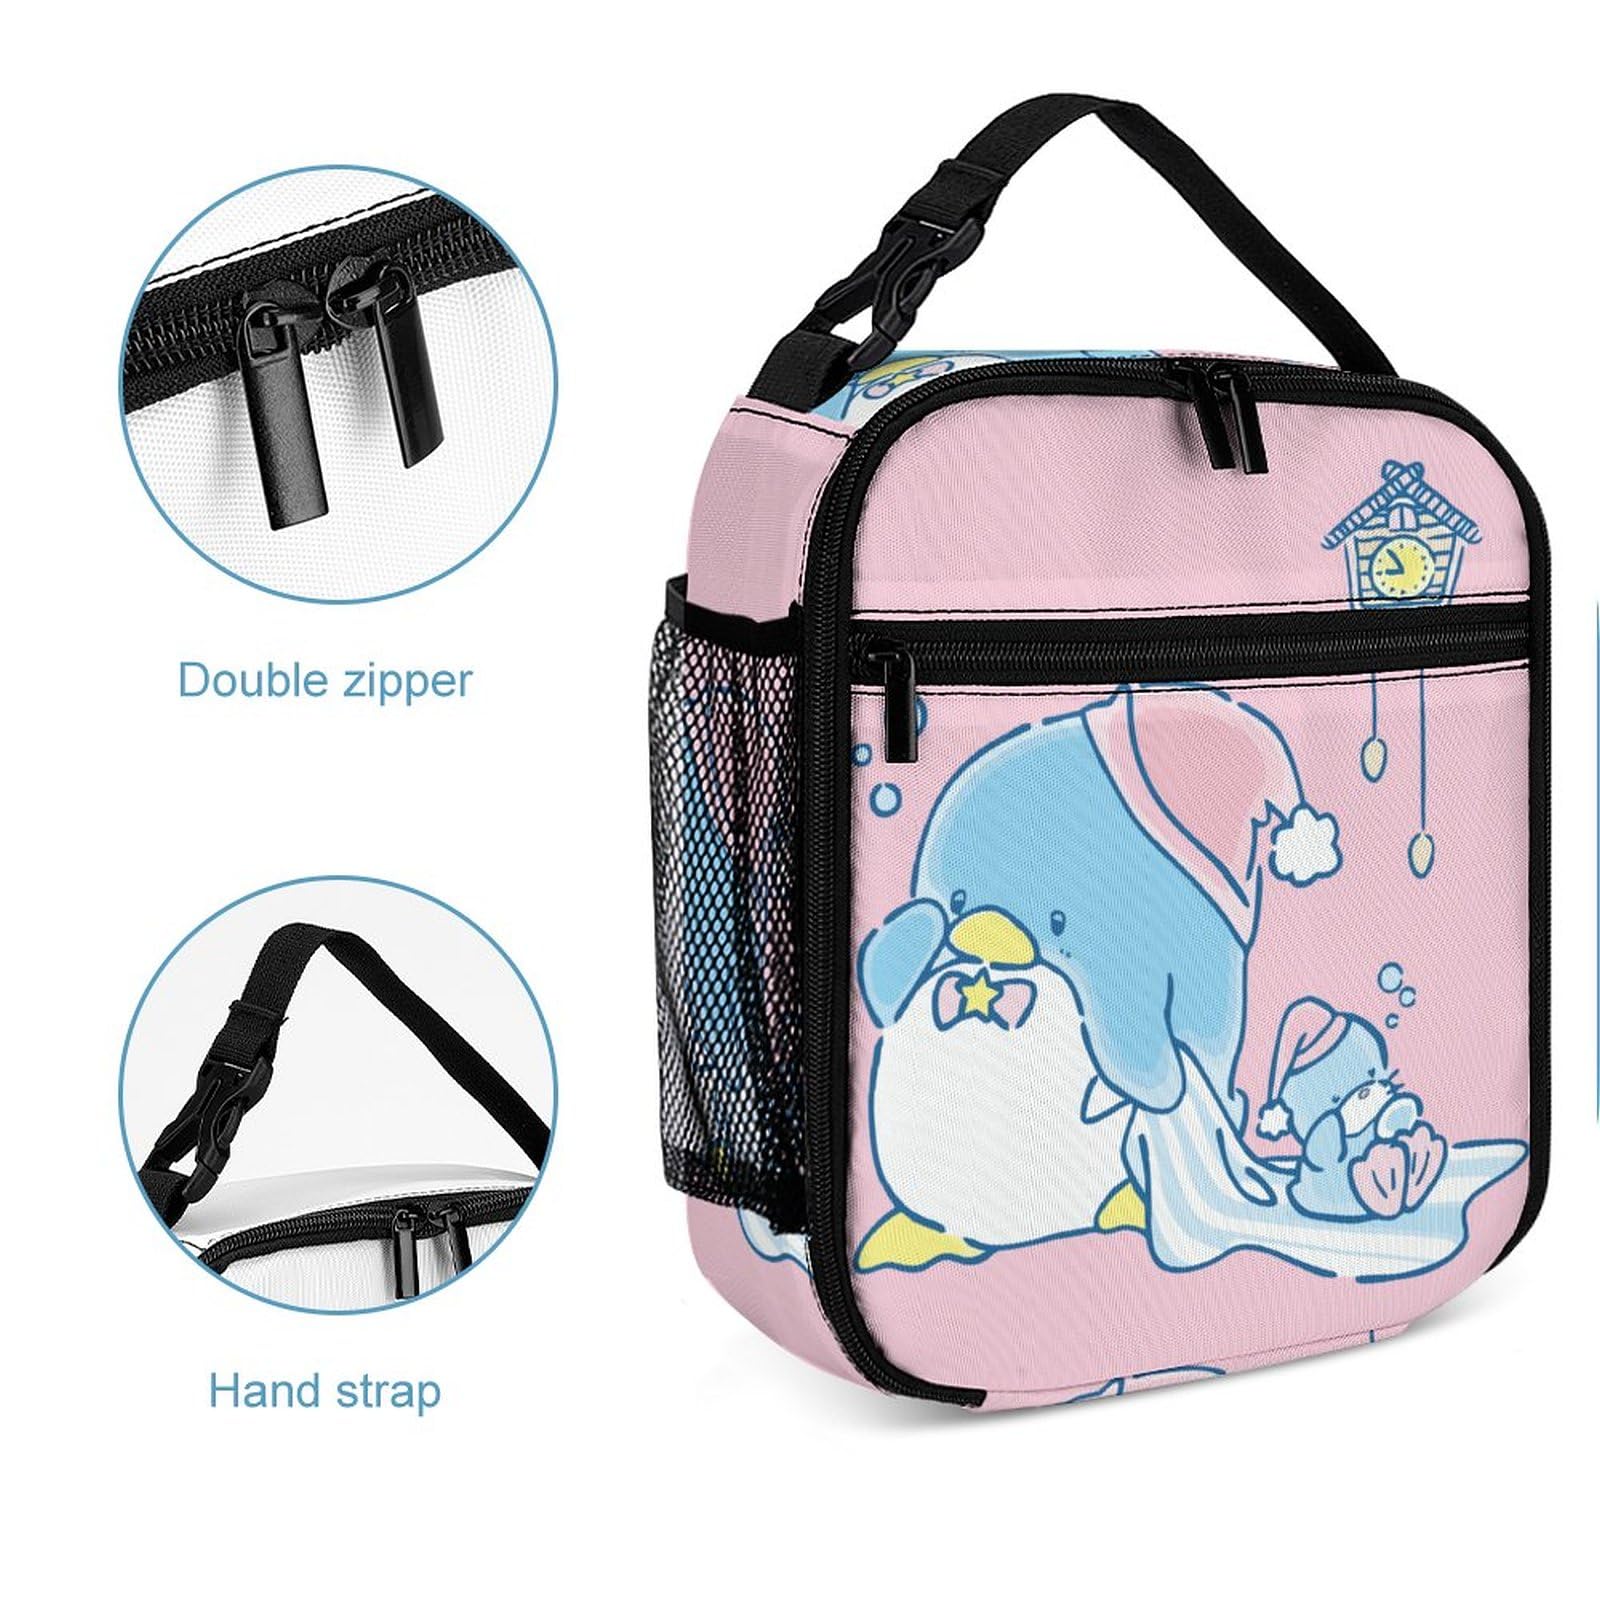 Cartoon Lunch Bag Tuxedosamm Lunch Tote Bag Portable Lunch Box With Pocket for Womens Men